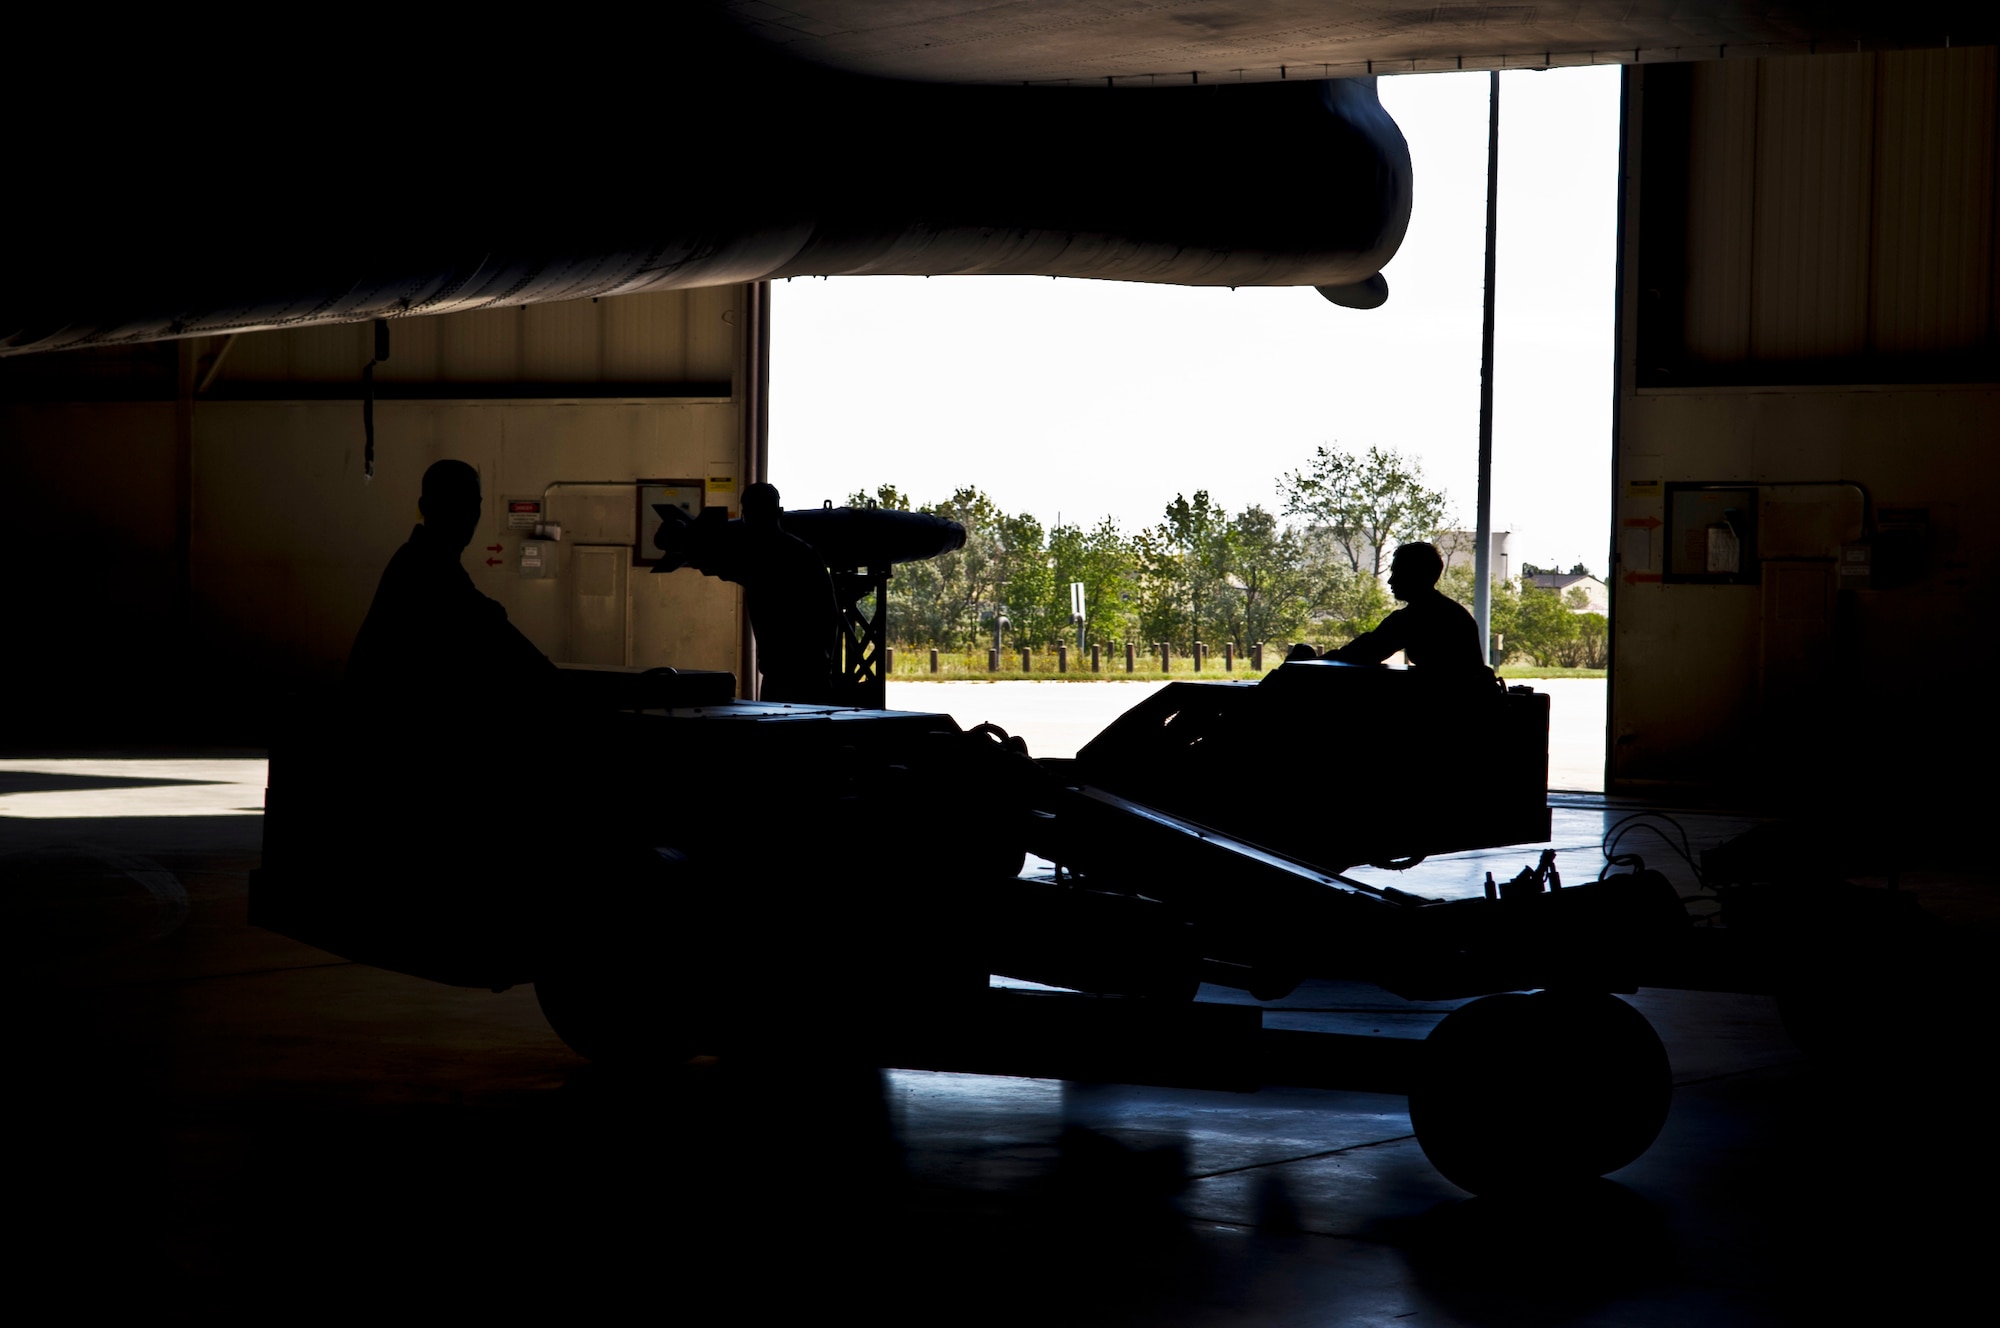 A weapons load crew team from the 5th Aircraft Maintenance Squadron, loads a joint direct attack GBU-38 munition from a trailer onto a MJ-1 Jammer on Minot Air Force Base, N.D., Sept. 5, 2014. The load crew is evaluated on how quickly they load munitions on a B-52H Stratofortress and how many discrepancies are found. (U.S. Air Force photo/Senior Airman Brittany Y. Bateman)